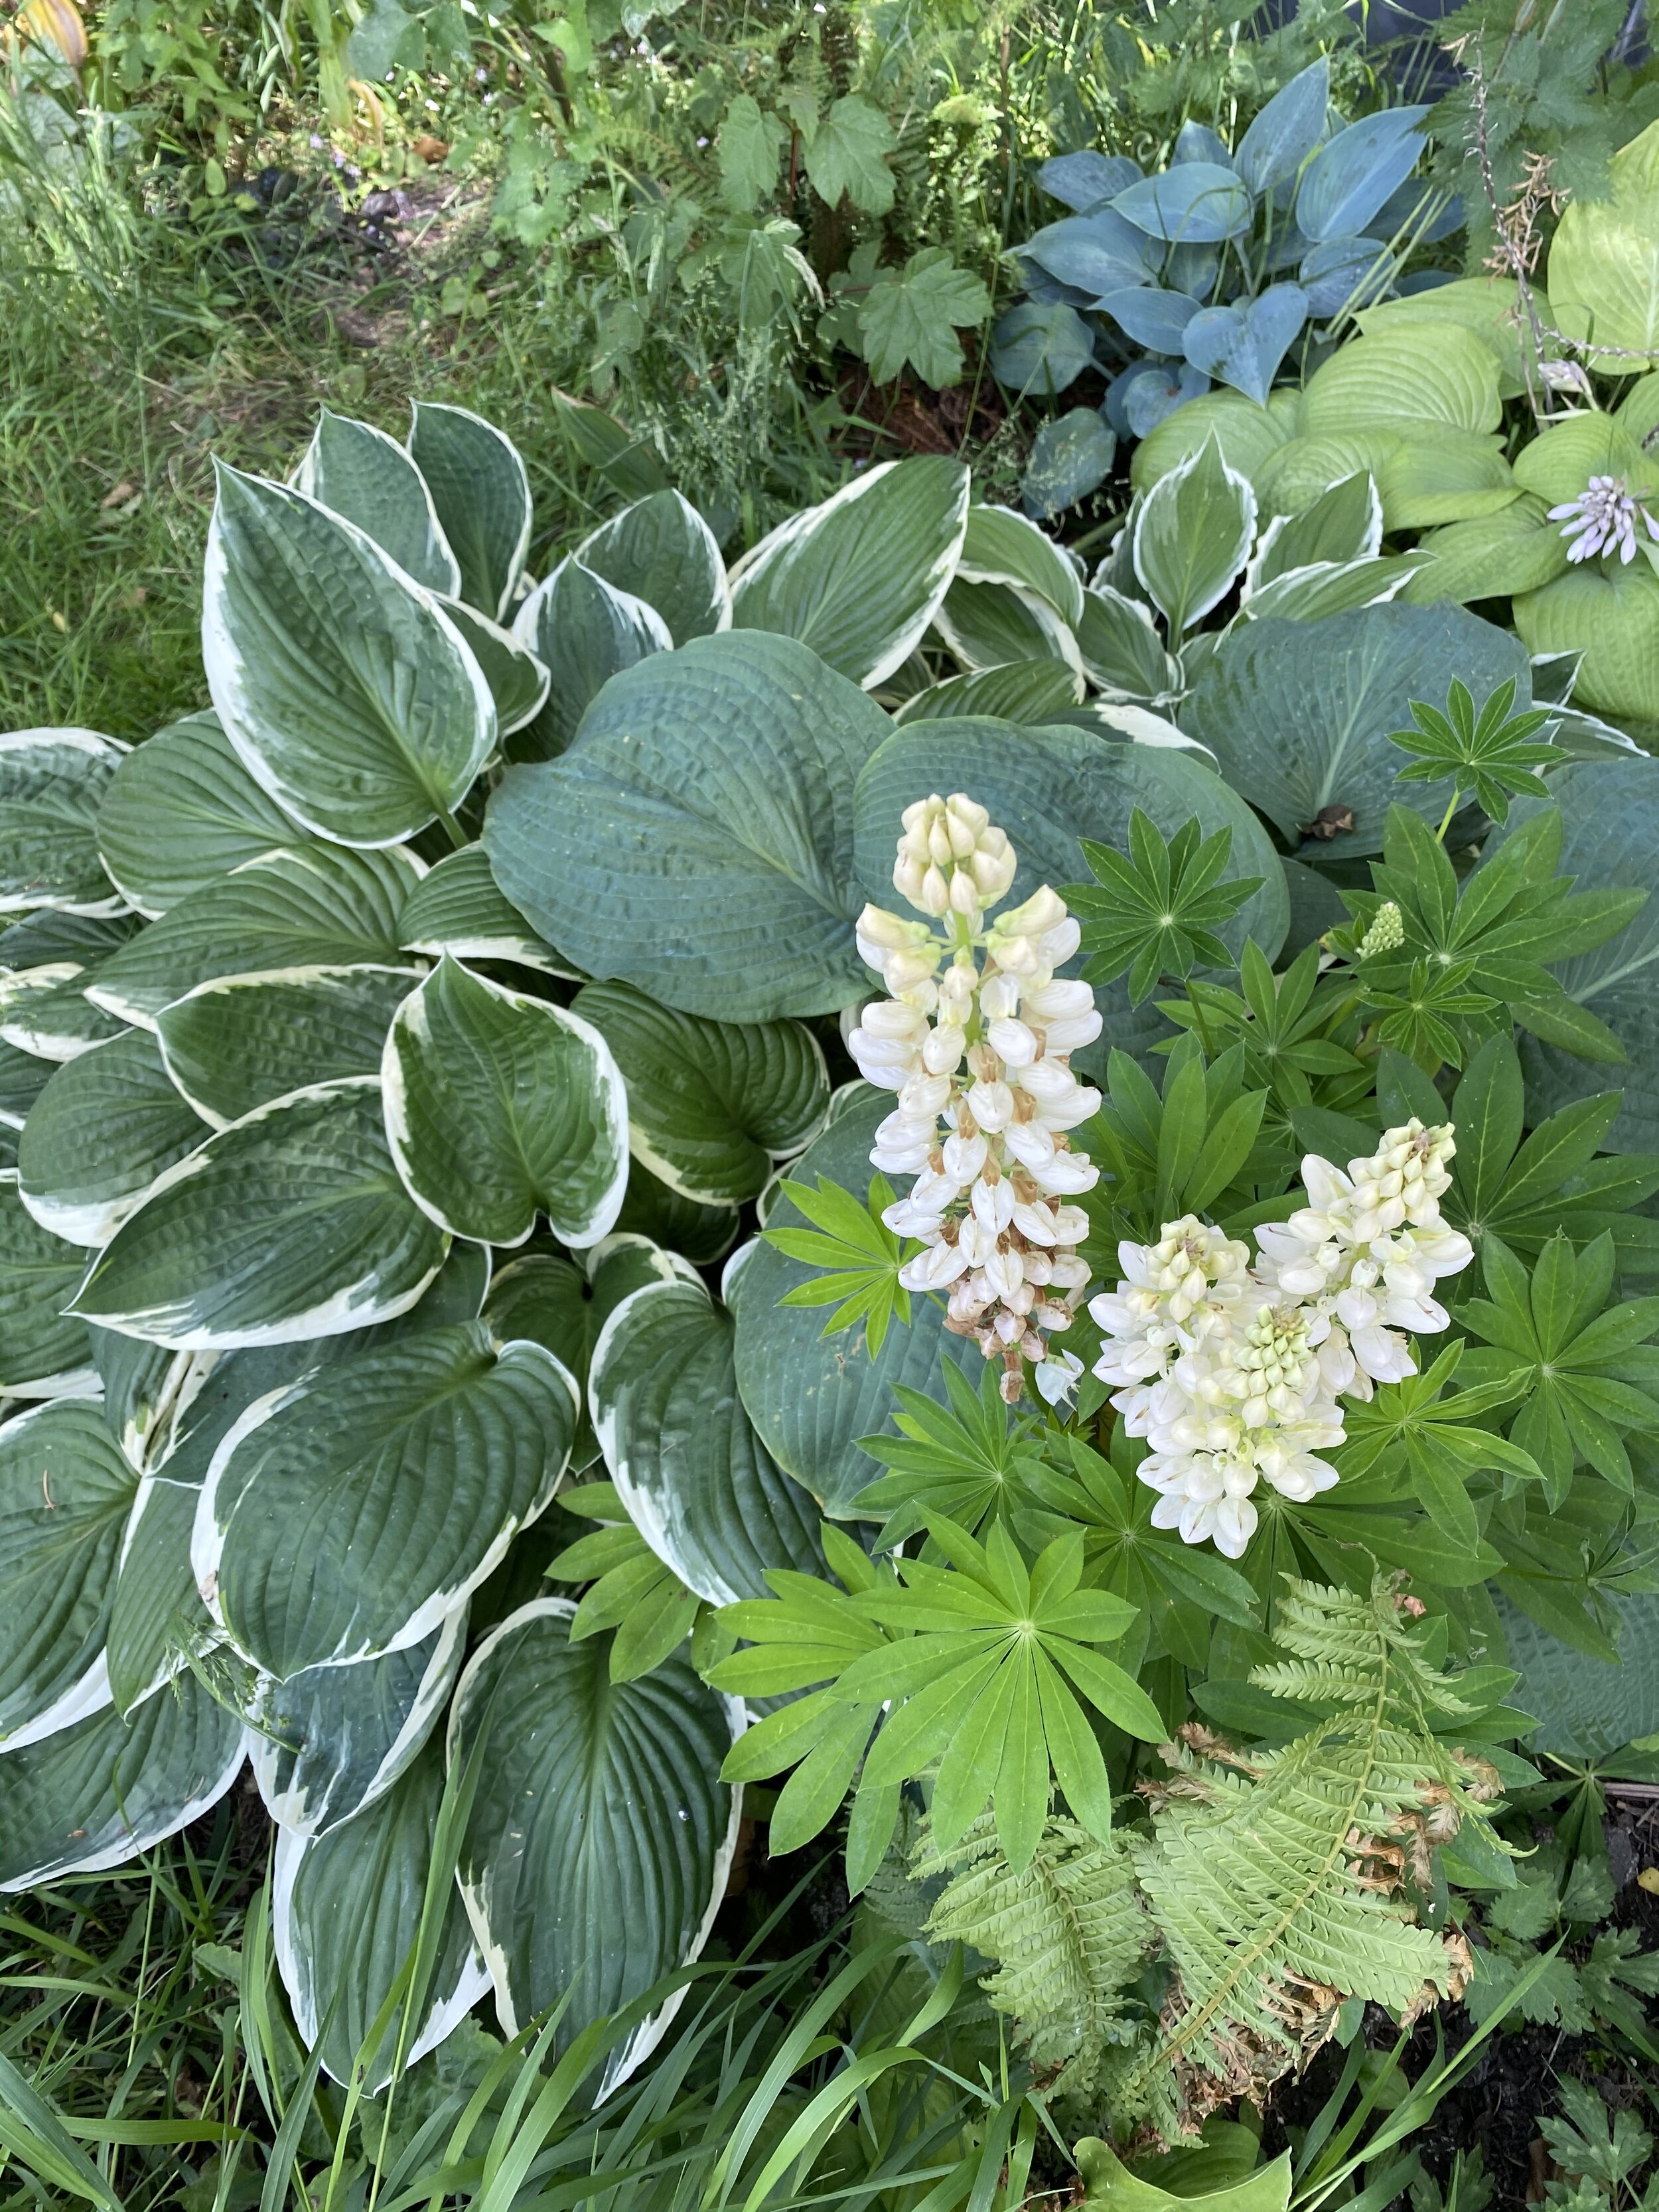 Hostas and dwarf white lupin flowers, 16 June 2020